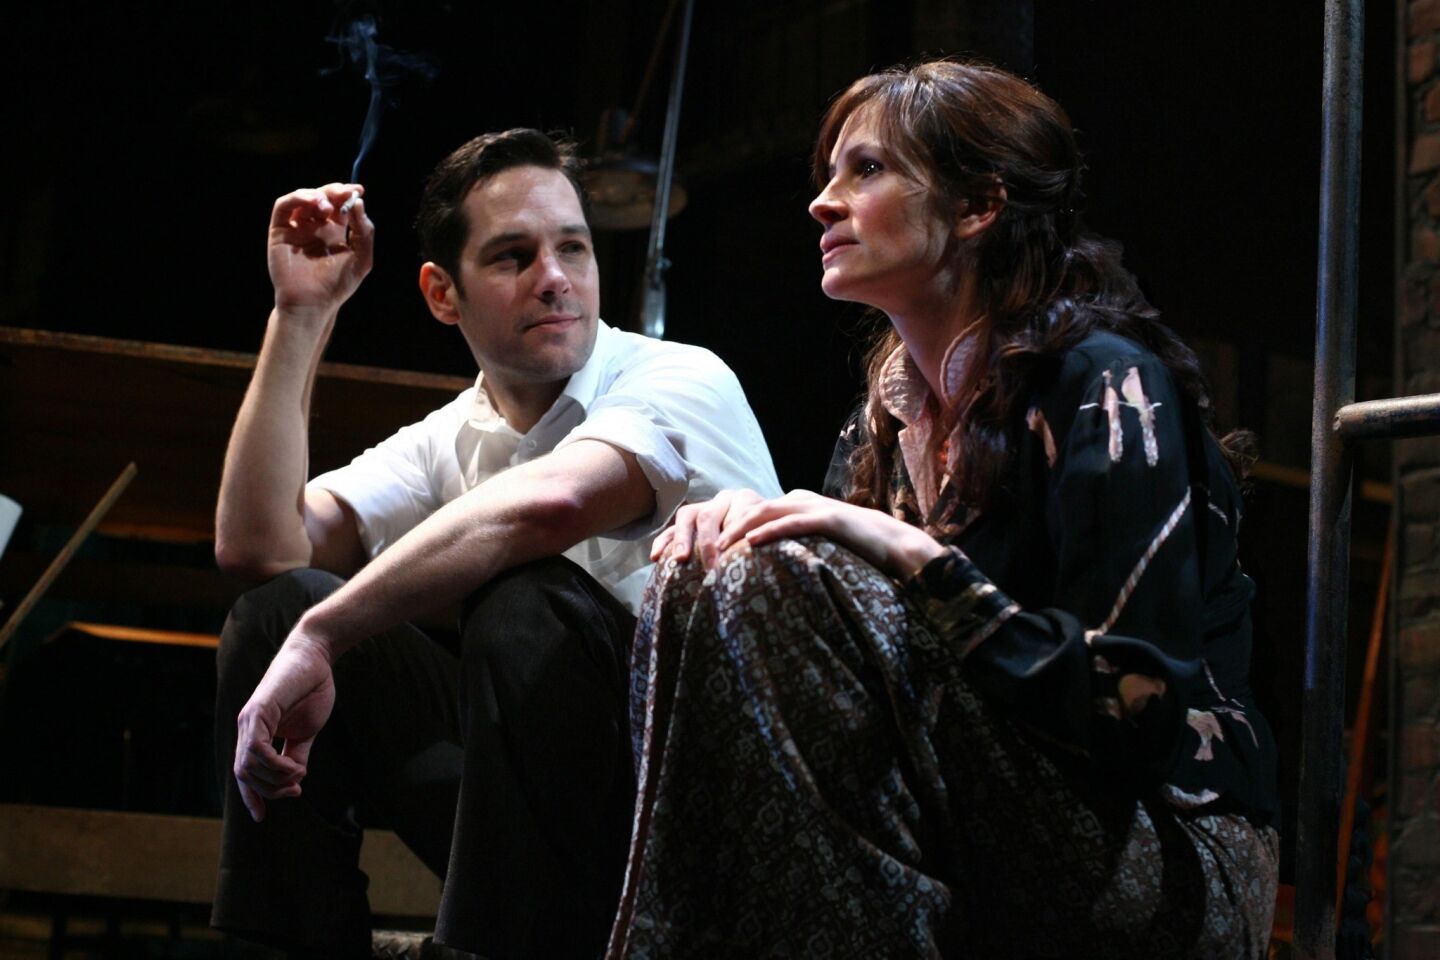 Julia Roberts made her Broadway debut in the revival of Richard Greenberg's "Three Days of Rain," which opened April 12, 2006. Paul Rudd, above, and Bradley Cooper also starred in the play that called for actors to play roles from two generations of family members.